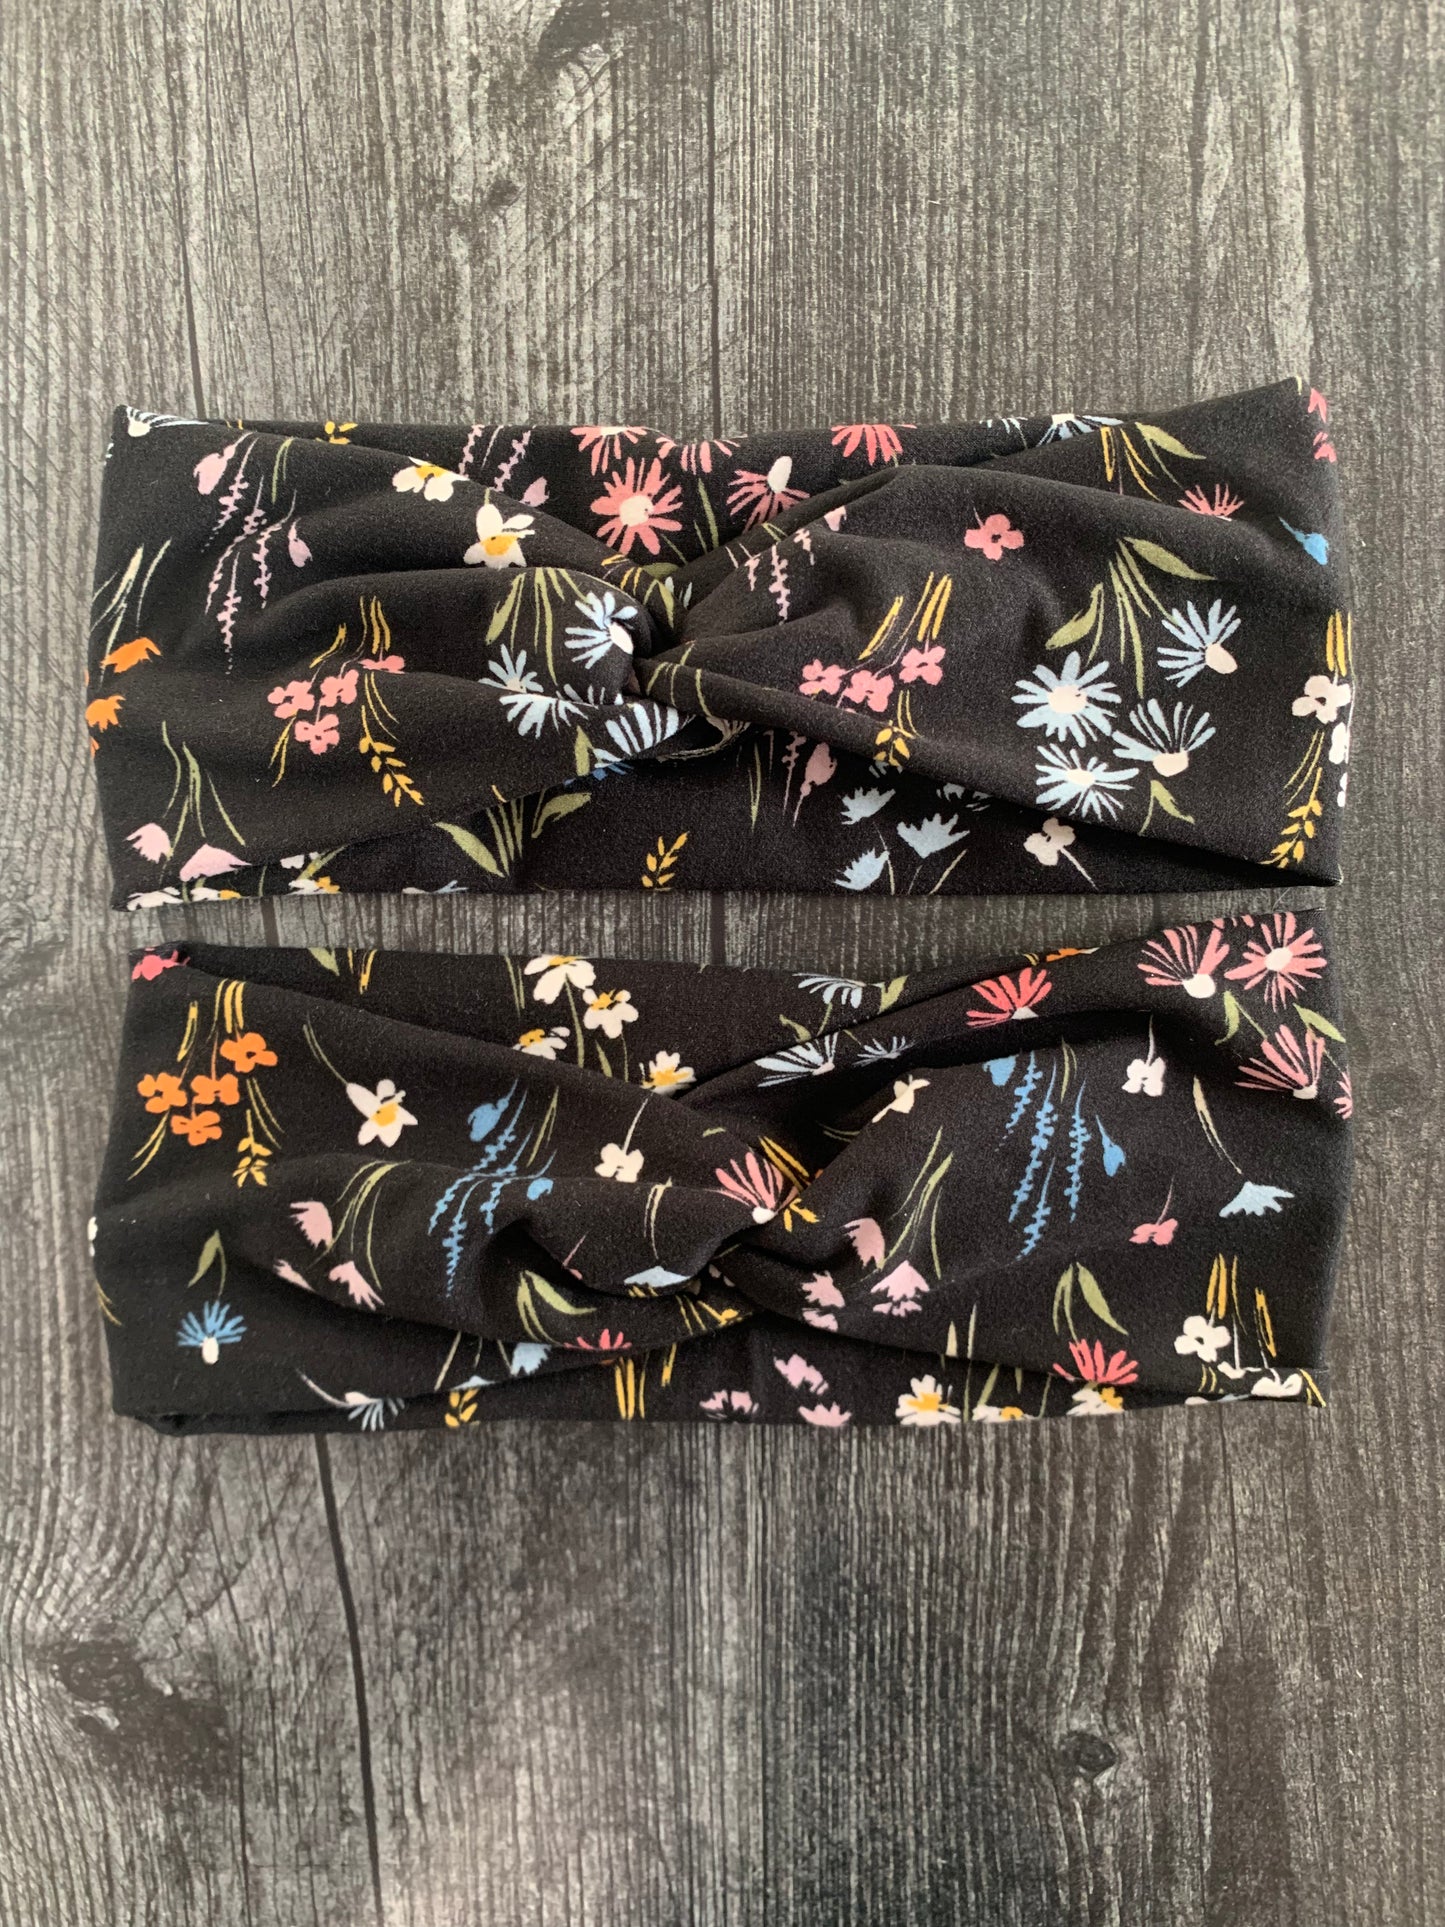 Colorful Floral on Black - Twisted Knit Headbands